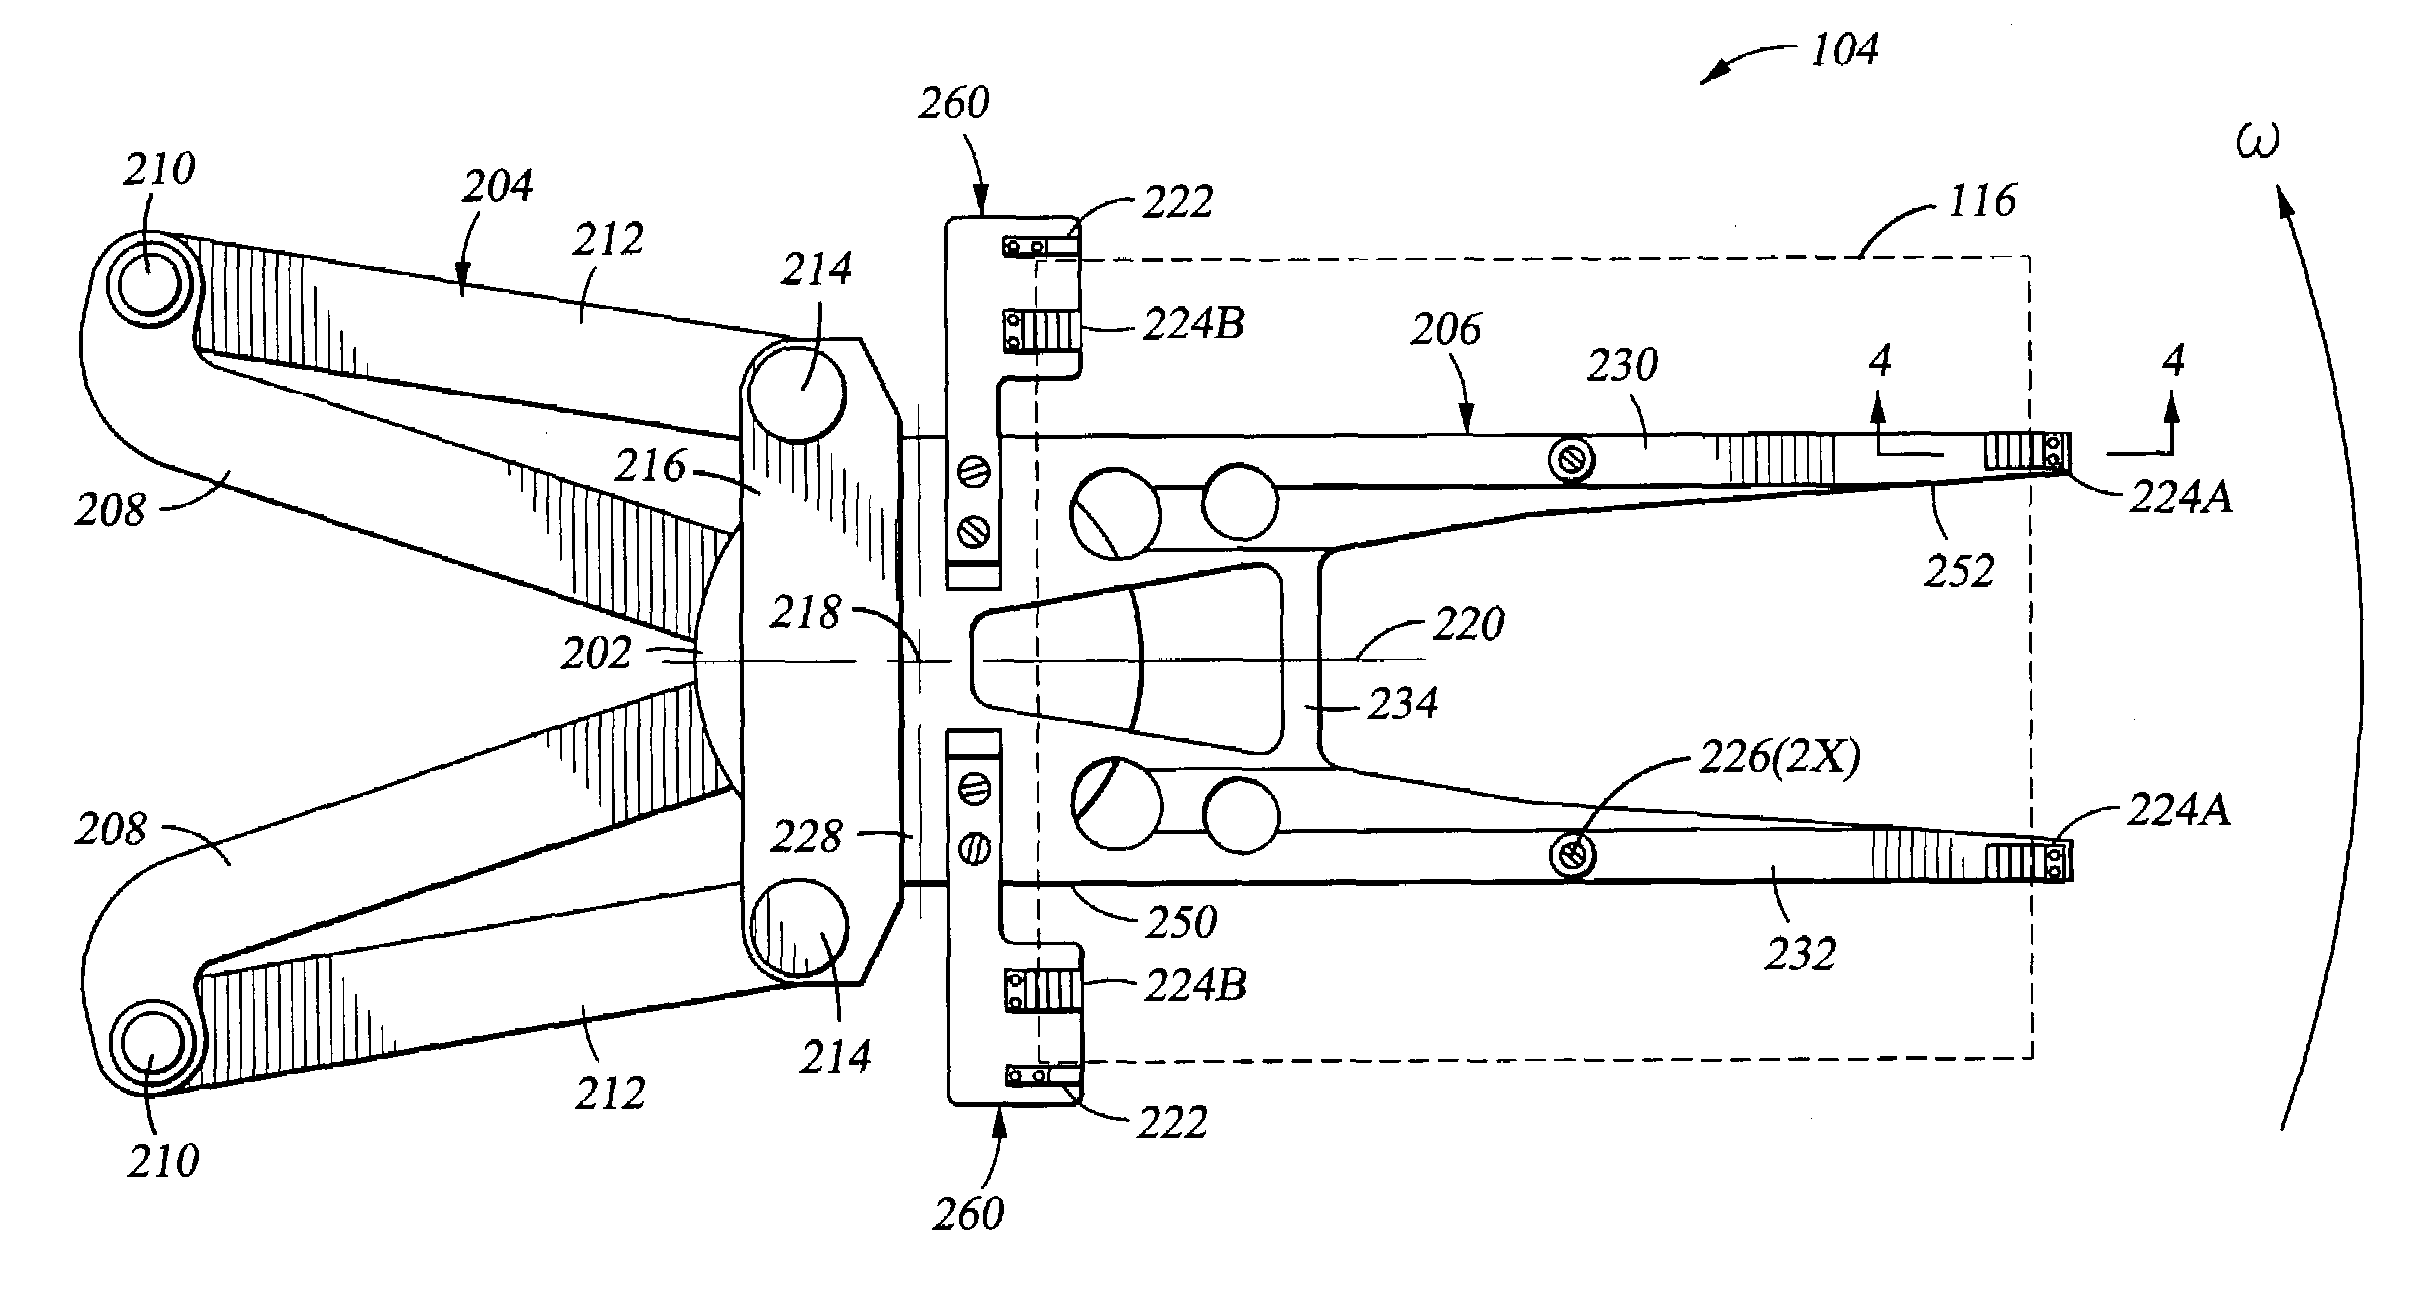 End effector assembly for supporting a substrate